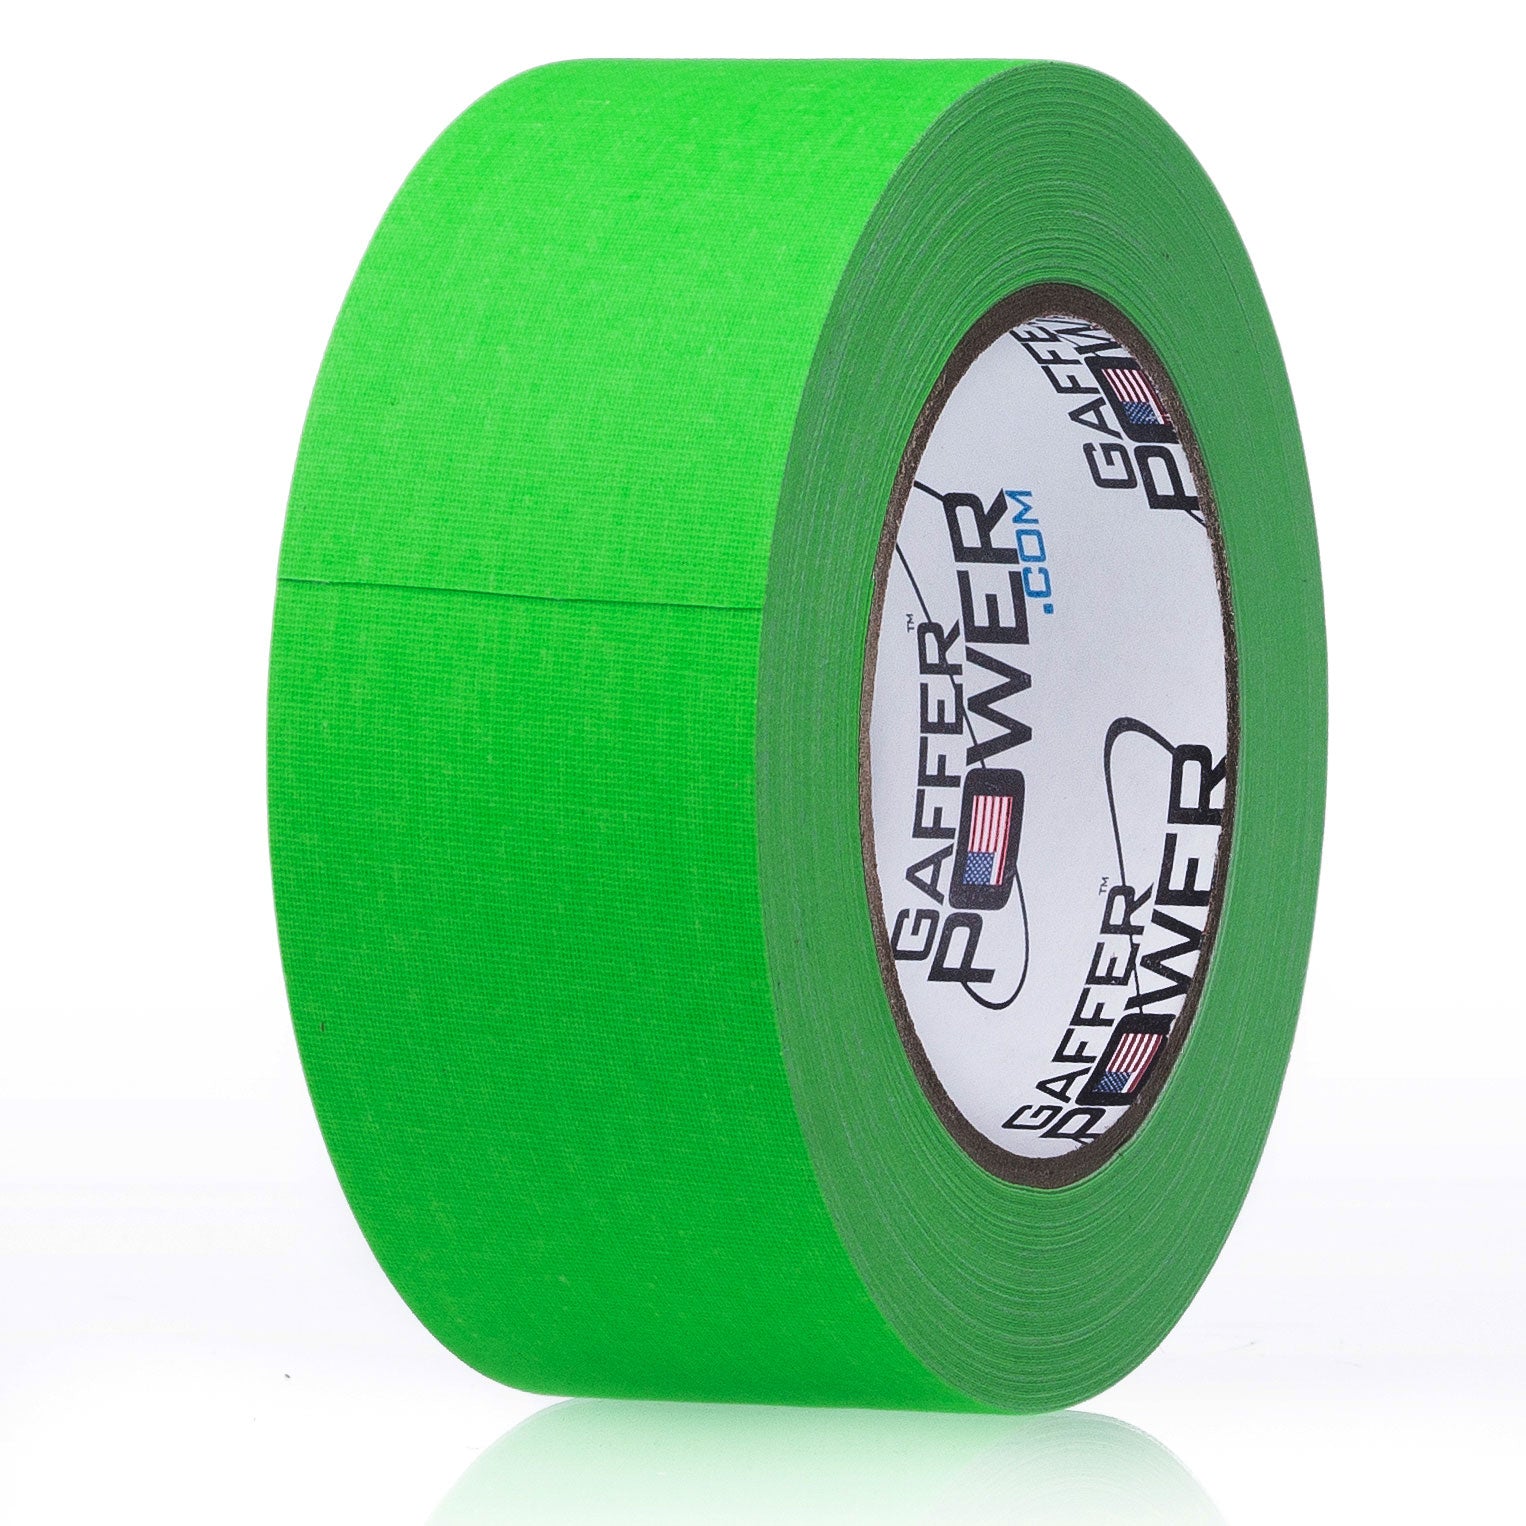 Gaffer Power Real Professional Premium Grade Gaffer Tape Made in The USA - White 4 inch x 30 Yards - Heavy Duty Gaffers Tape - Non-Reflective 